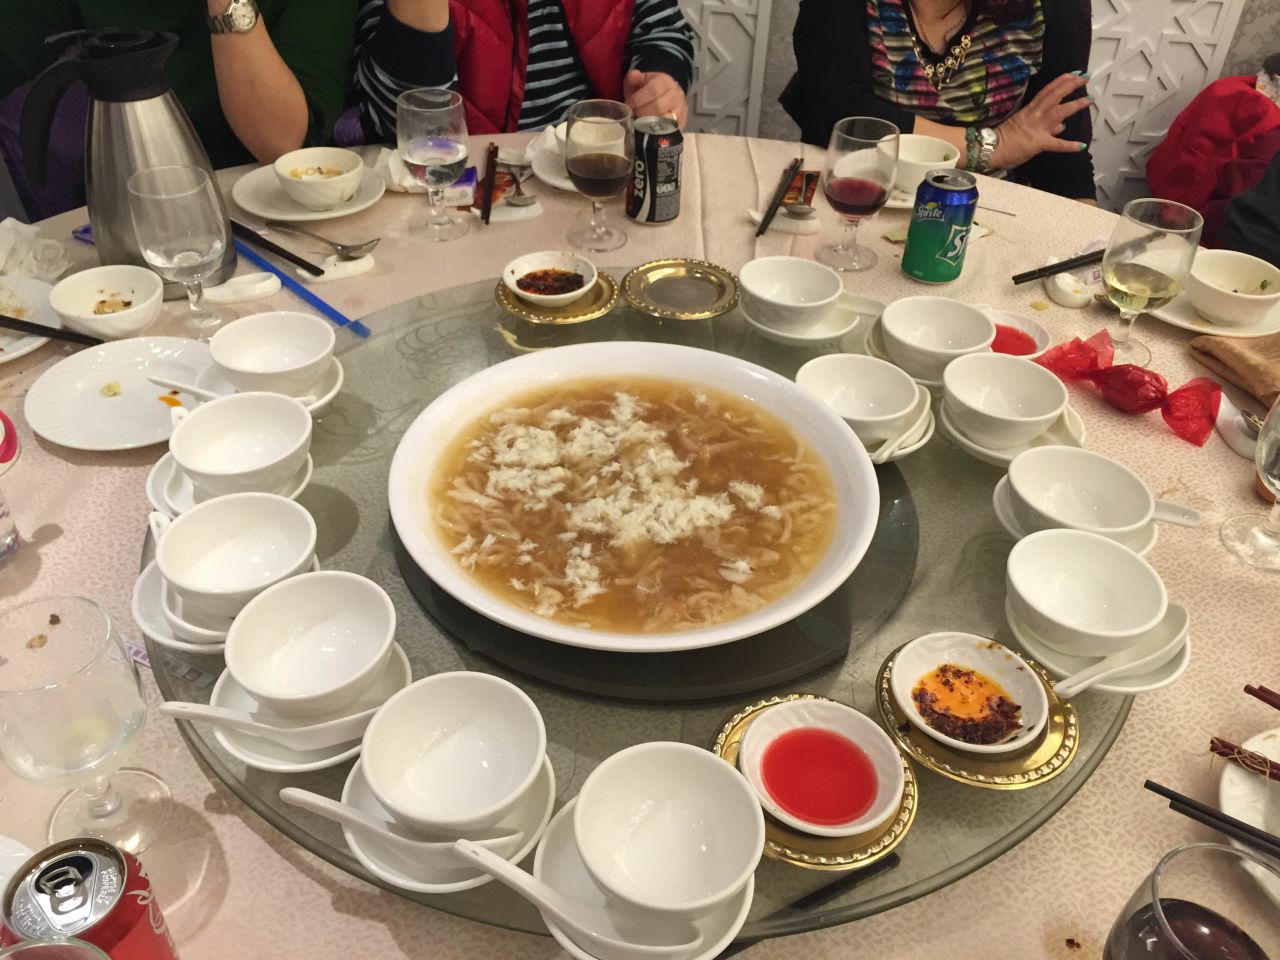 Shark fin soup is served in a birthday banquet in Hong Kong.